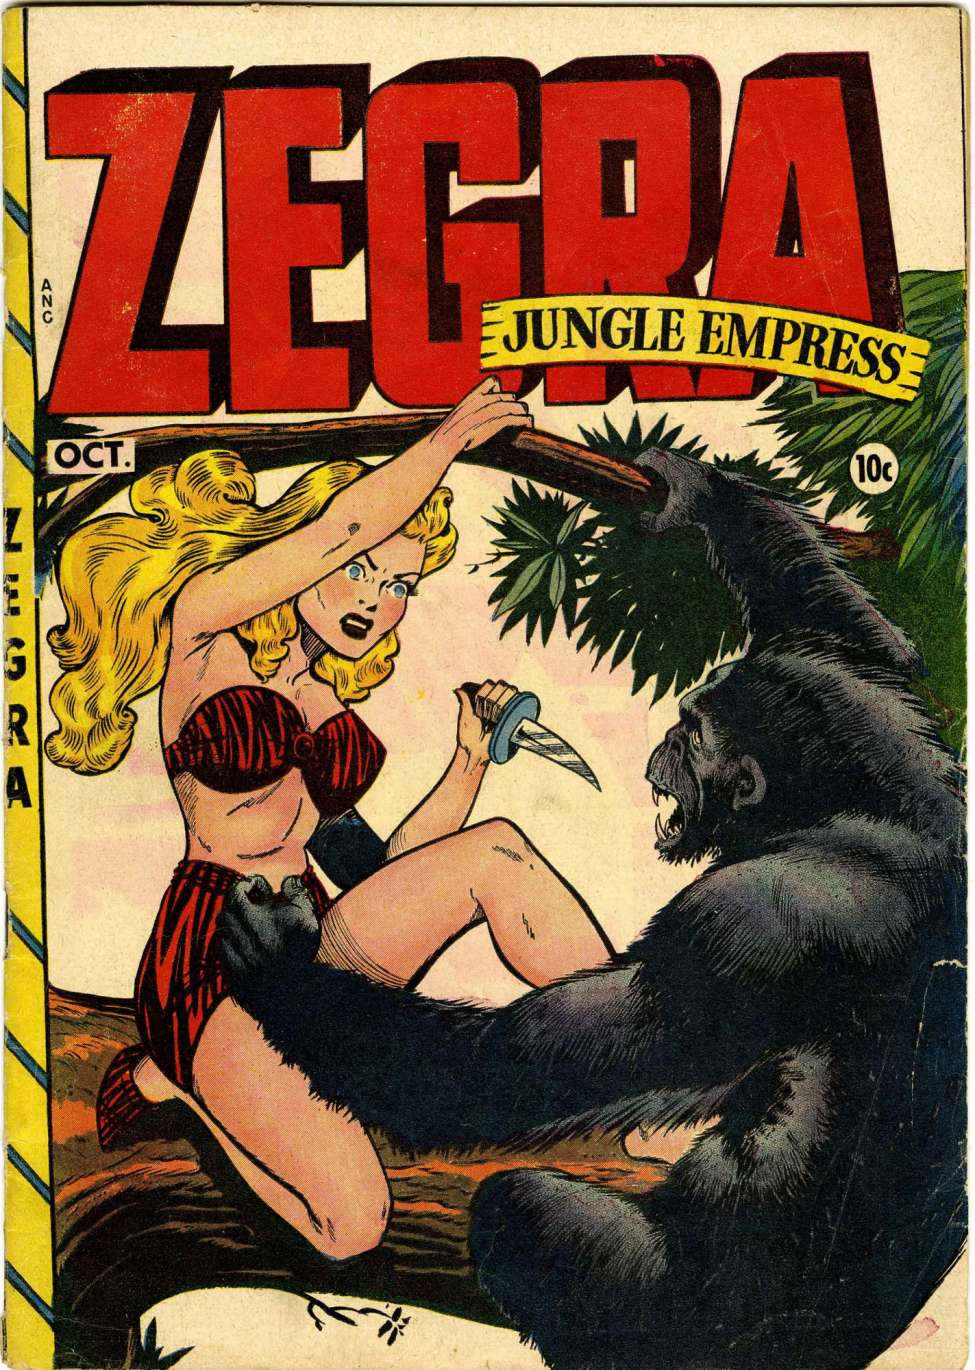 Book Cover For Zegra 2